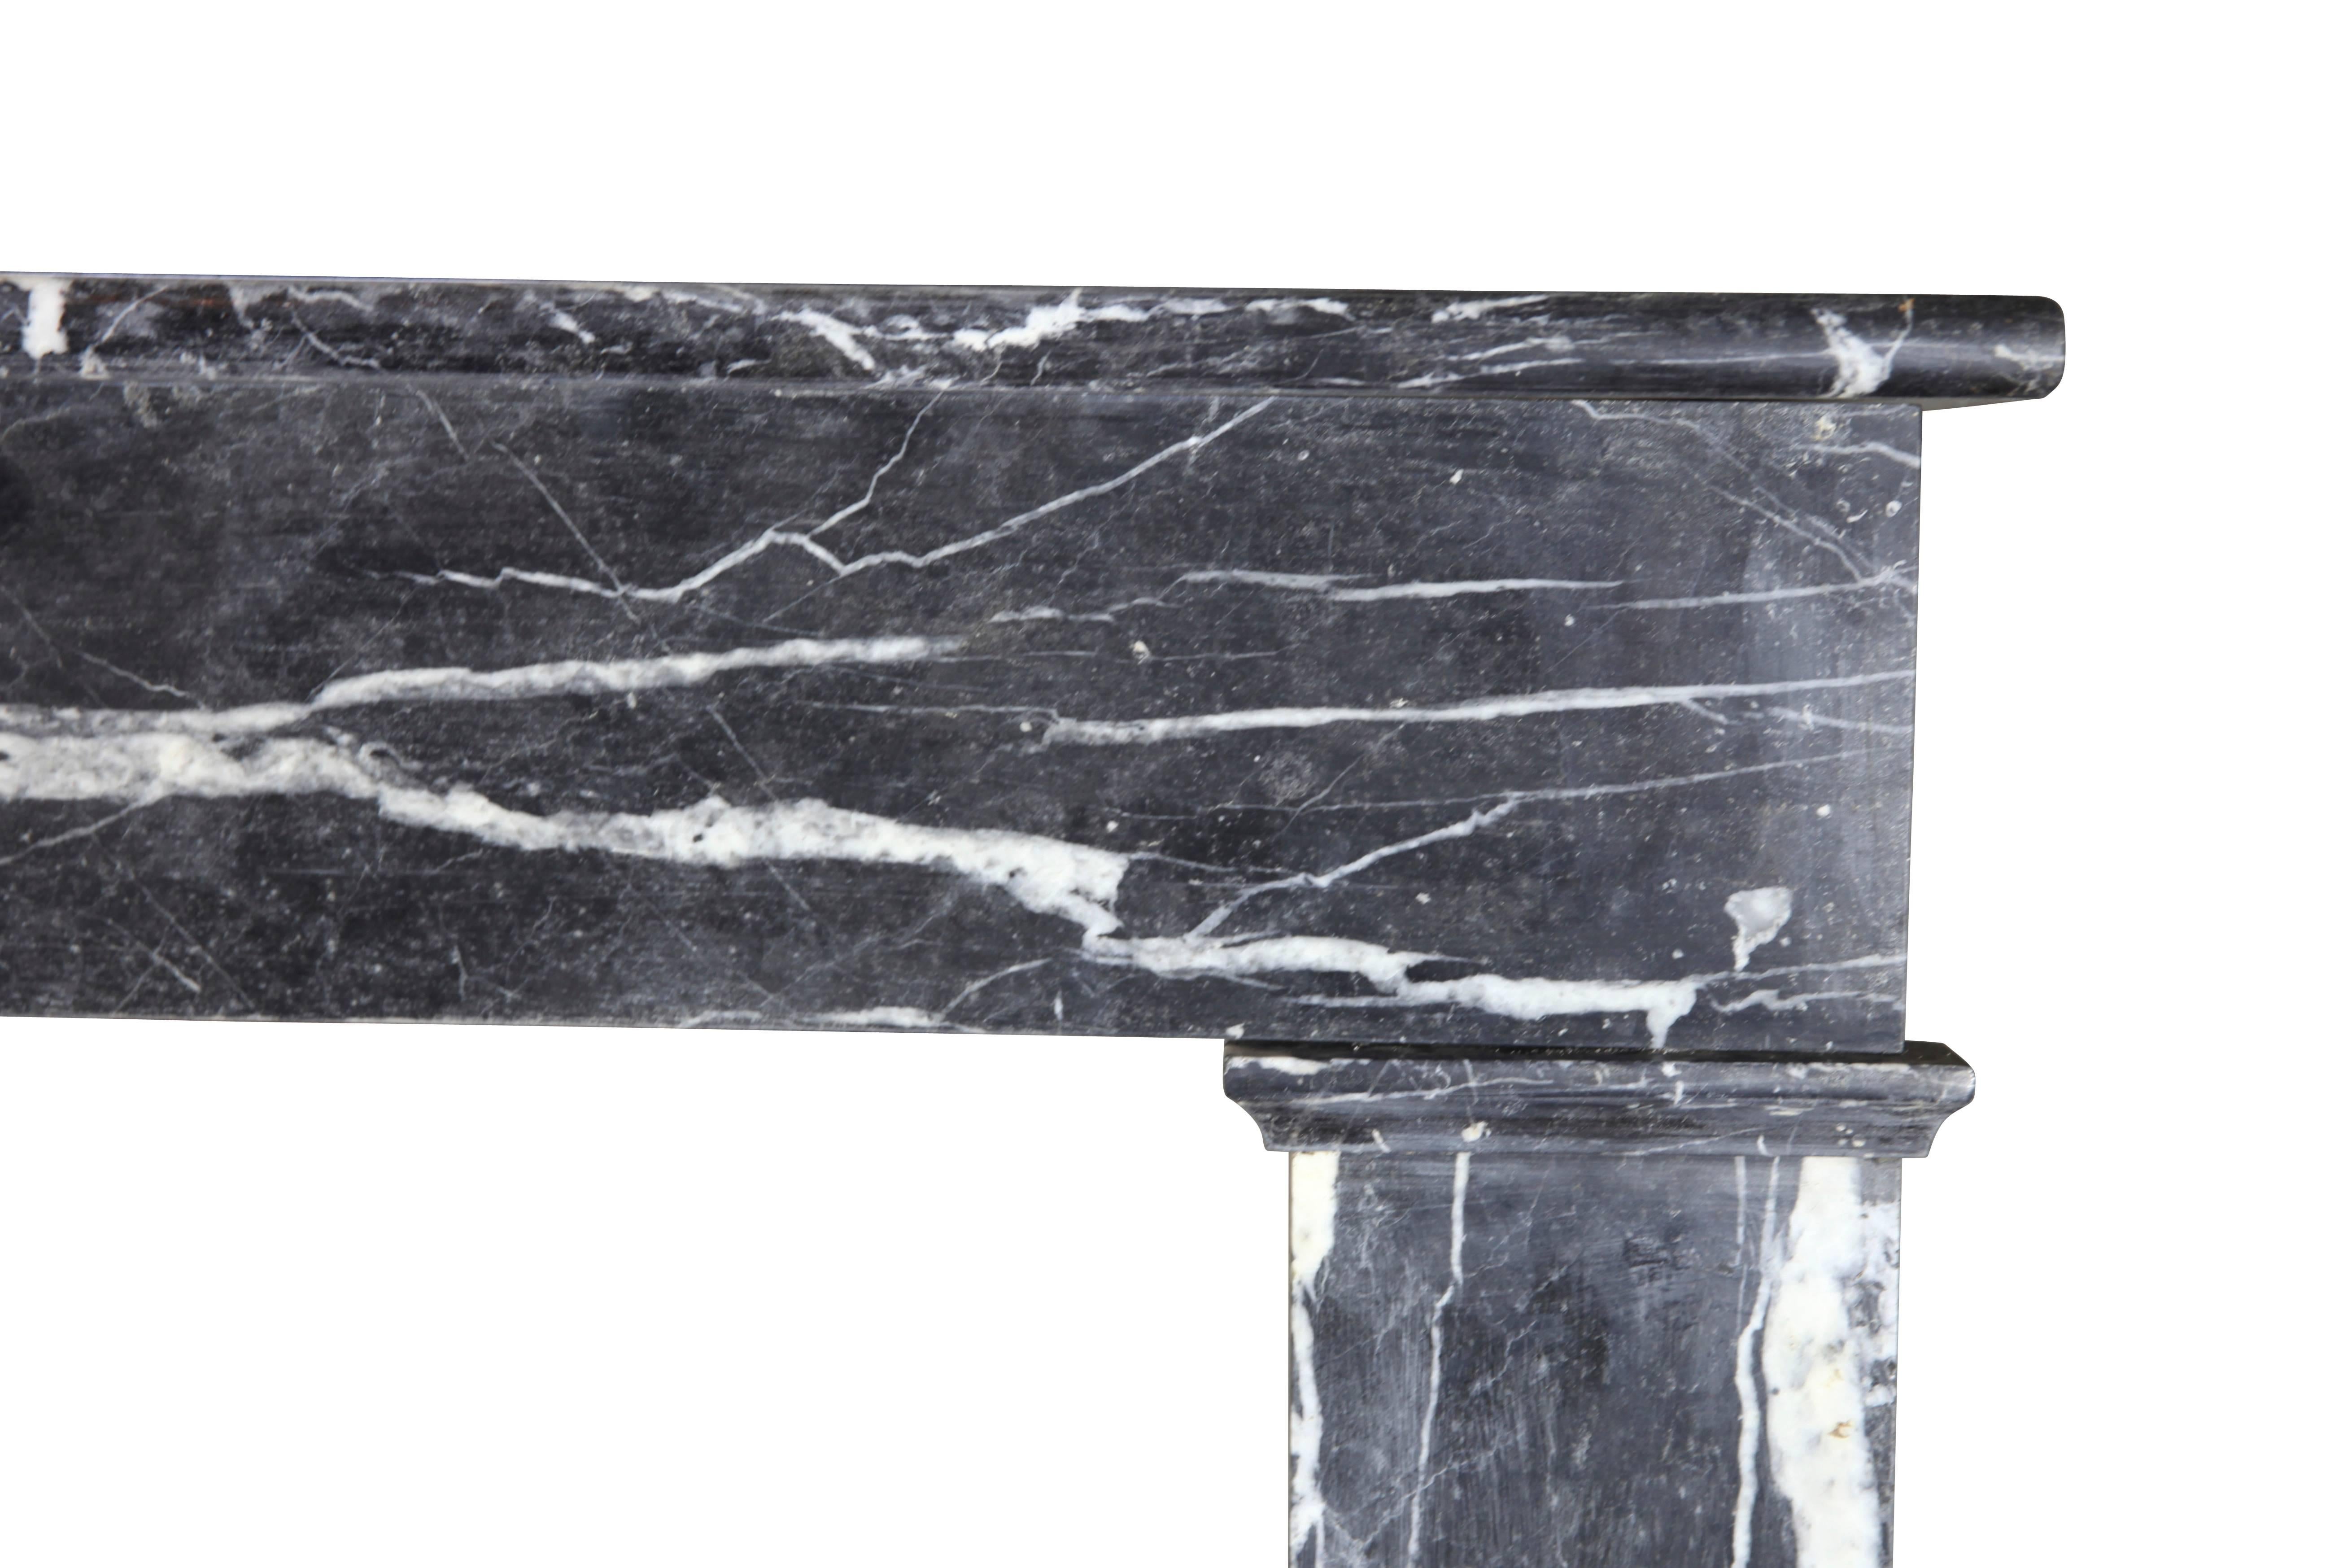  A Louis Phillippe period antique fireplace surround in gleaming dark St-Anne marble.  

Measures: 
125 cm EW 49,21"
101 cm EH 39,76"
97 cm IW 38,18 "
88 cm IH 34,64"
32 cm S 12,59" 